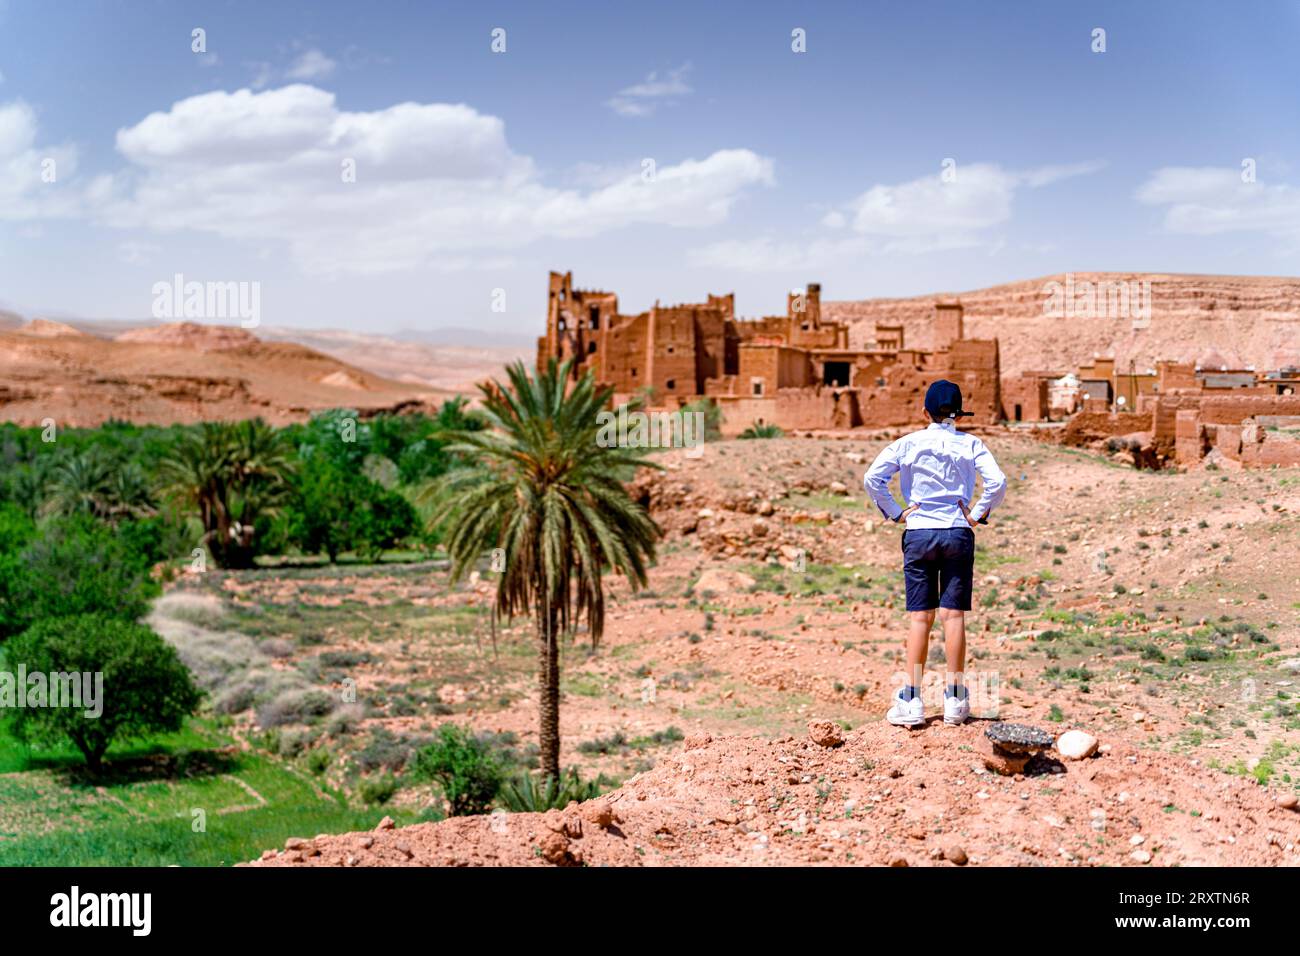 Rear view of boy admiring an old kasbah, Ounila Valley, Atlas mountains, Ouarzazate province, Morocco, North Africa, Africa Stock Photo